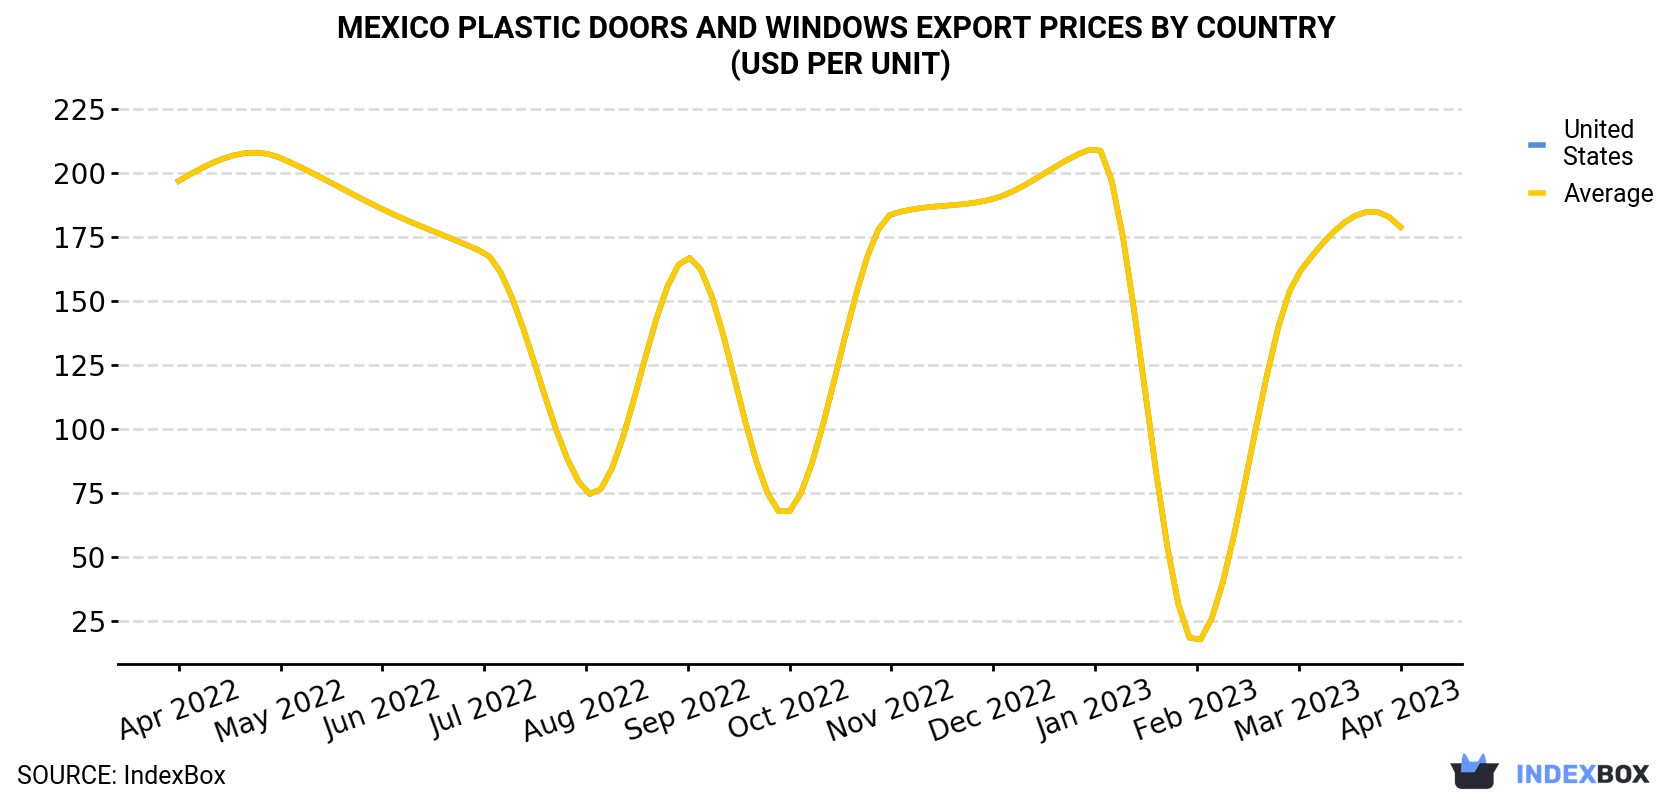 Mexico Plastic Doors And Windows Export Prices By Country (USD Per Unit)